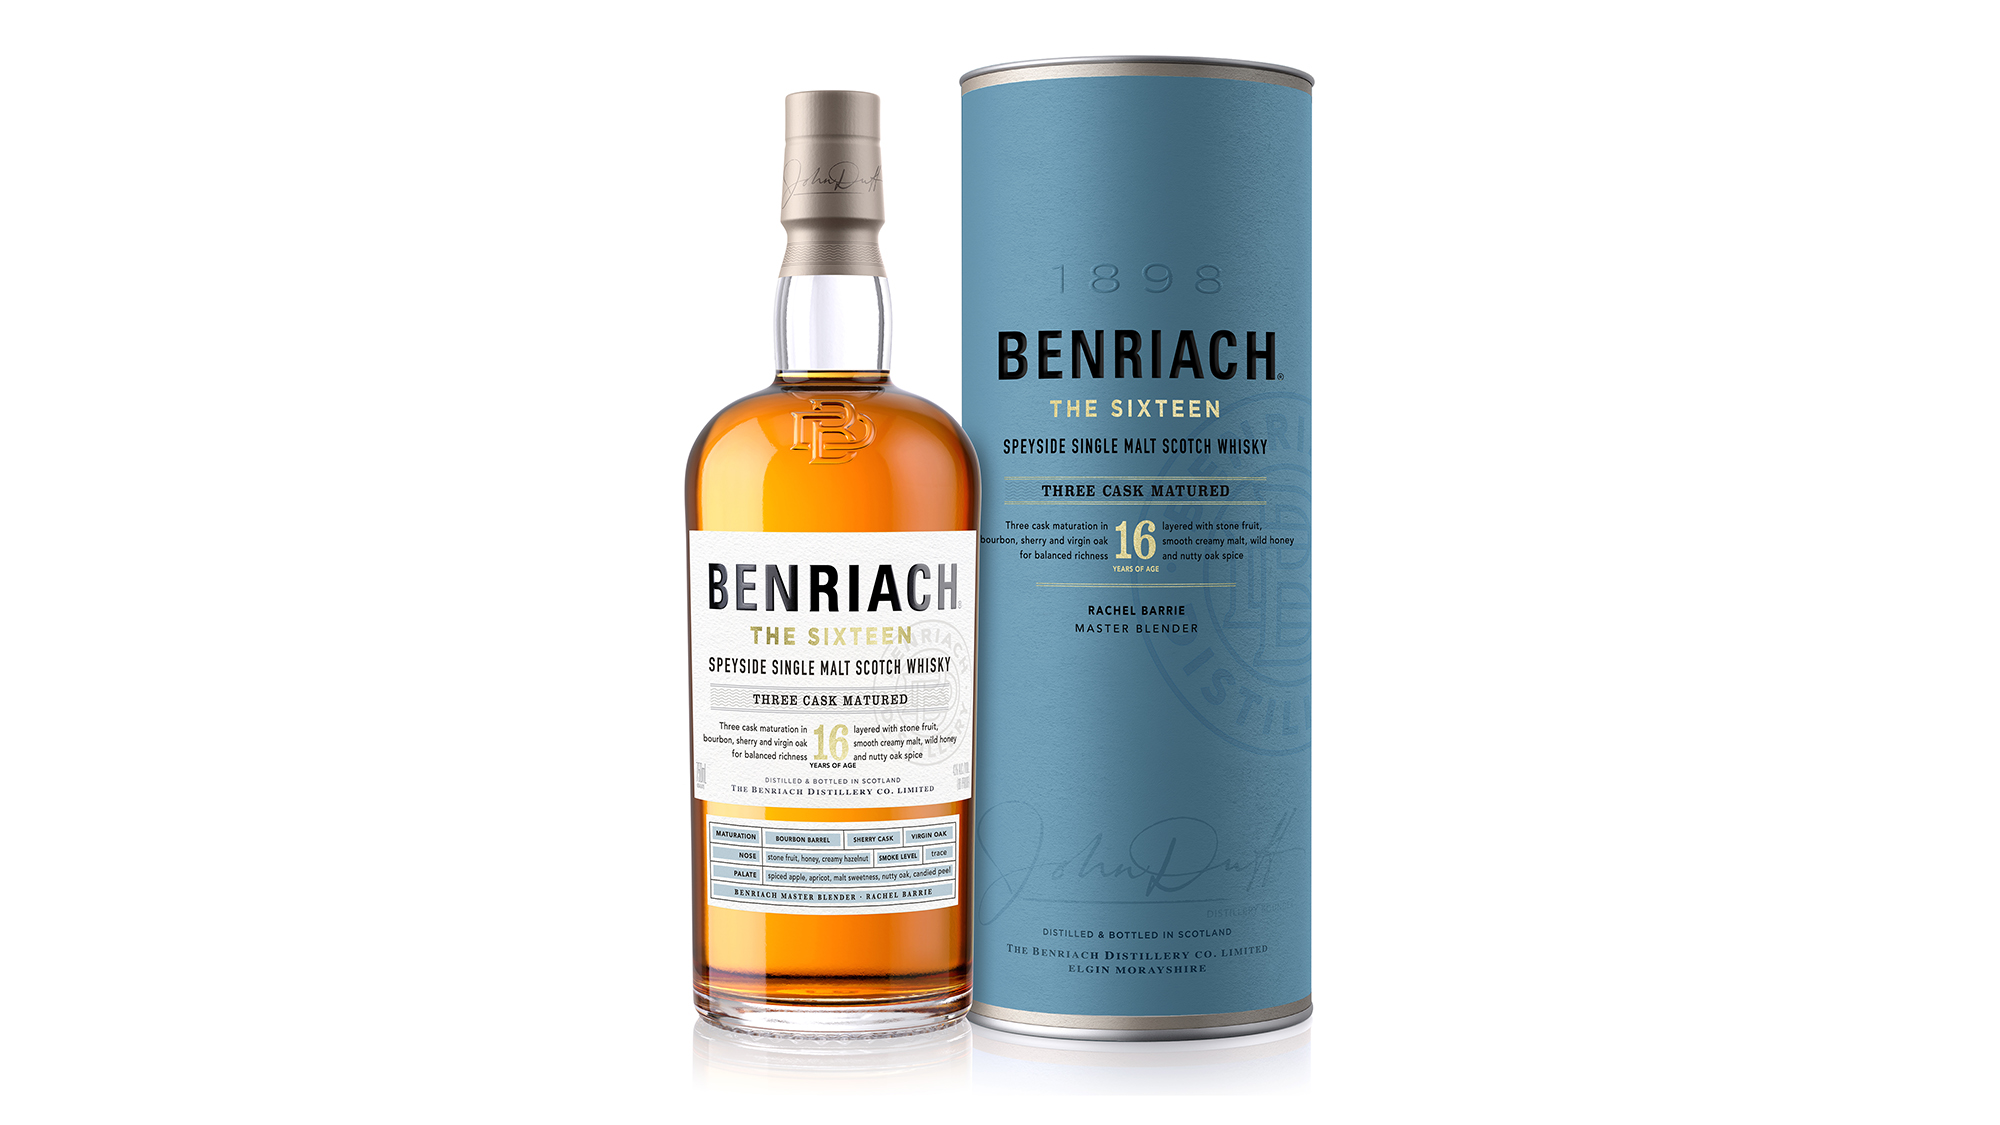 Benriach Brings Back One Of Speyside’s Top Whiskies, The Sixteen